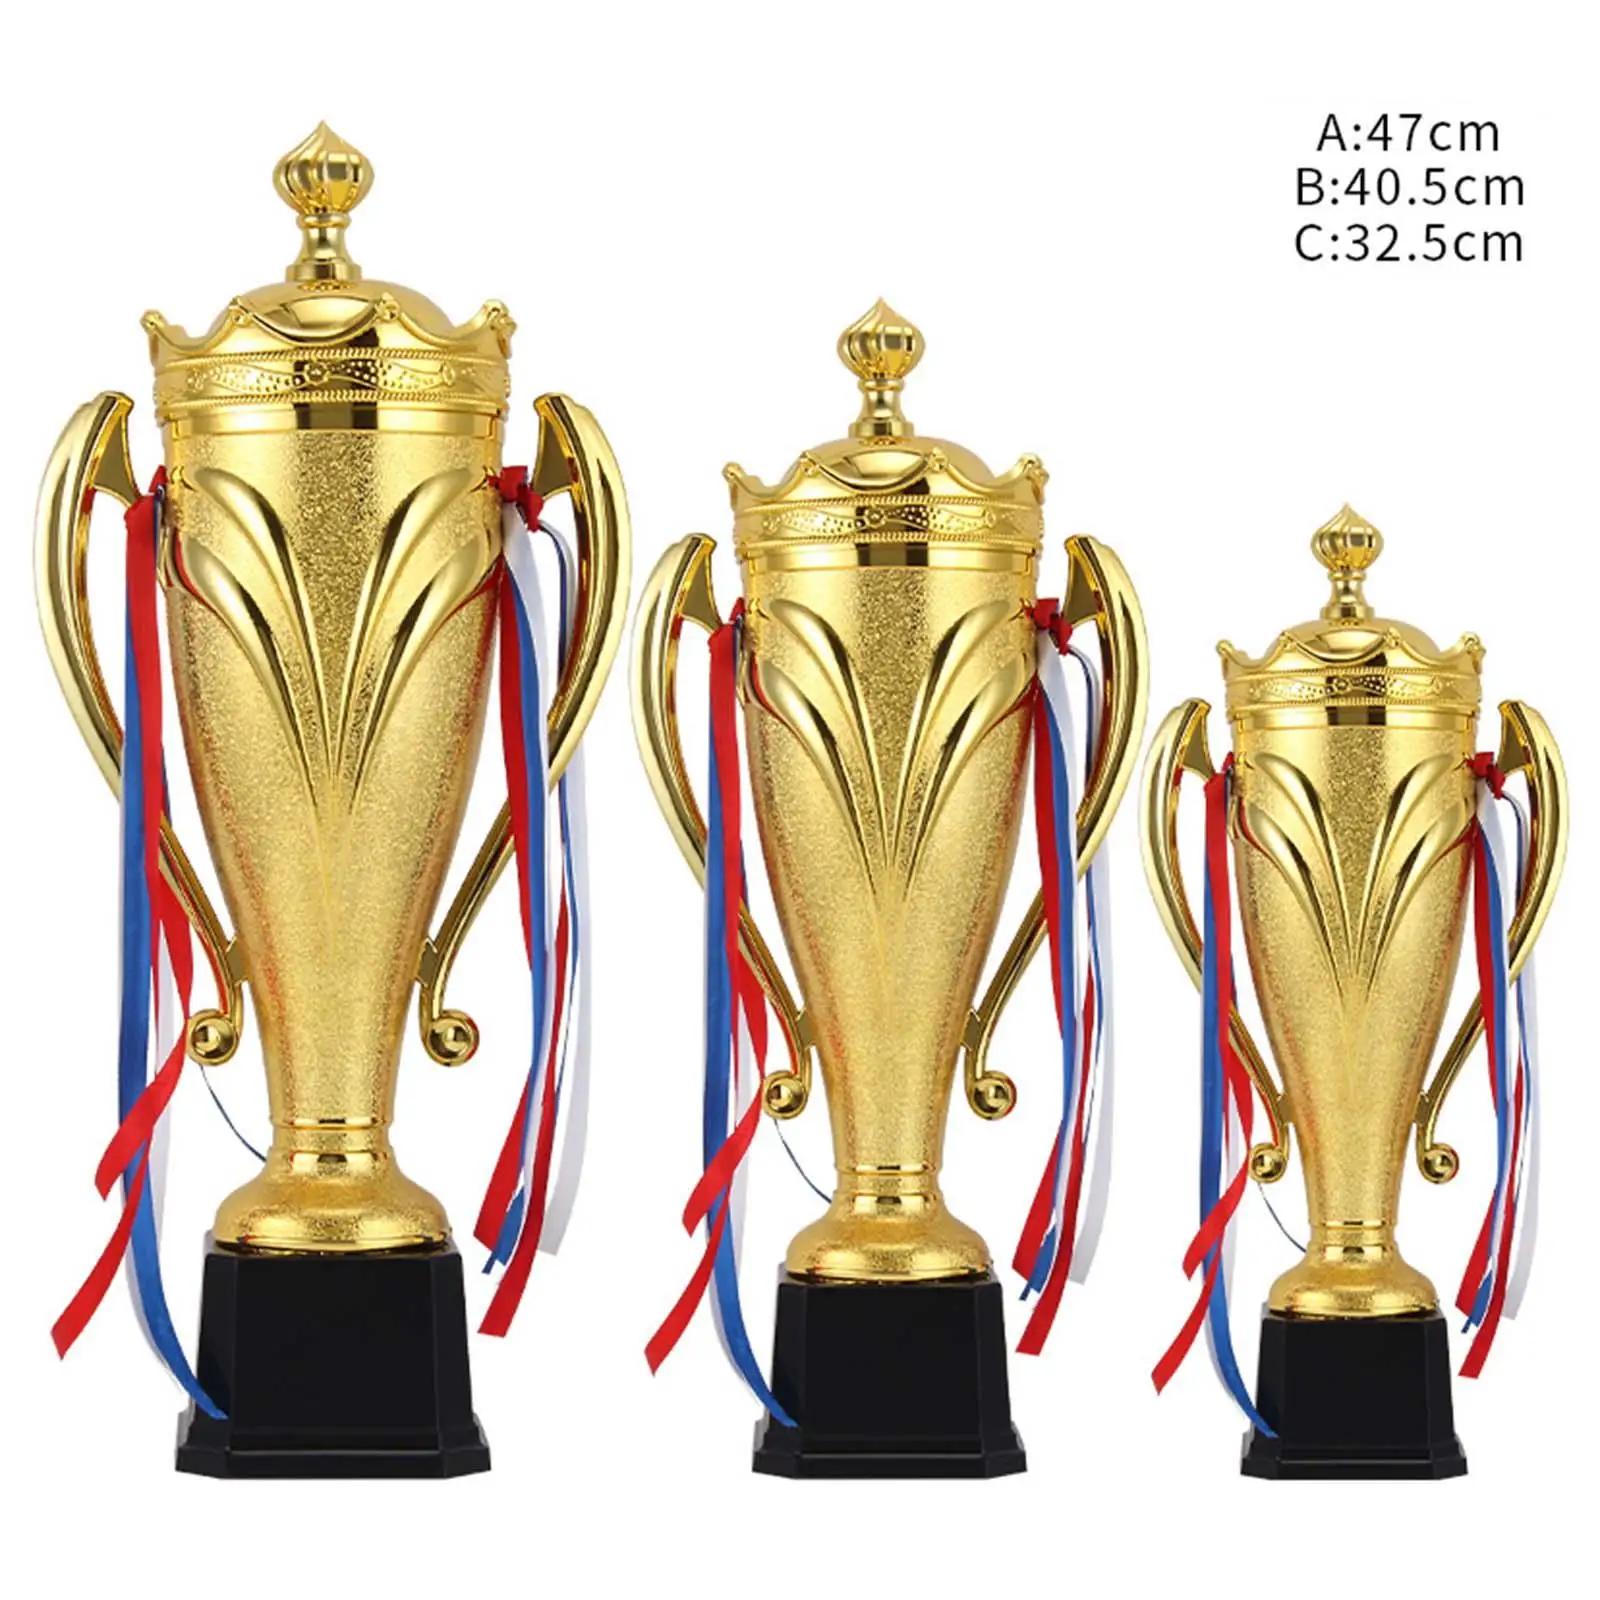 Child Trophy Cups PP Award Trophies Cup Winning Prizes for Ceremony